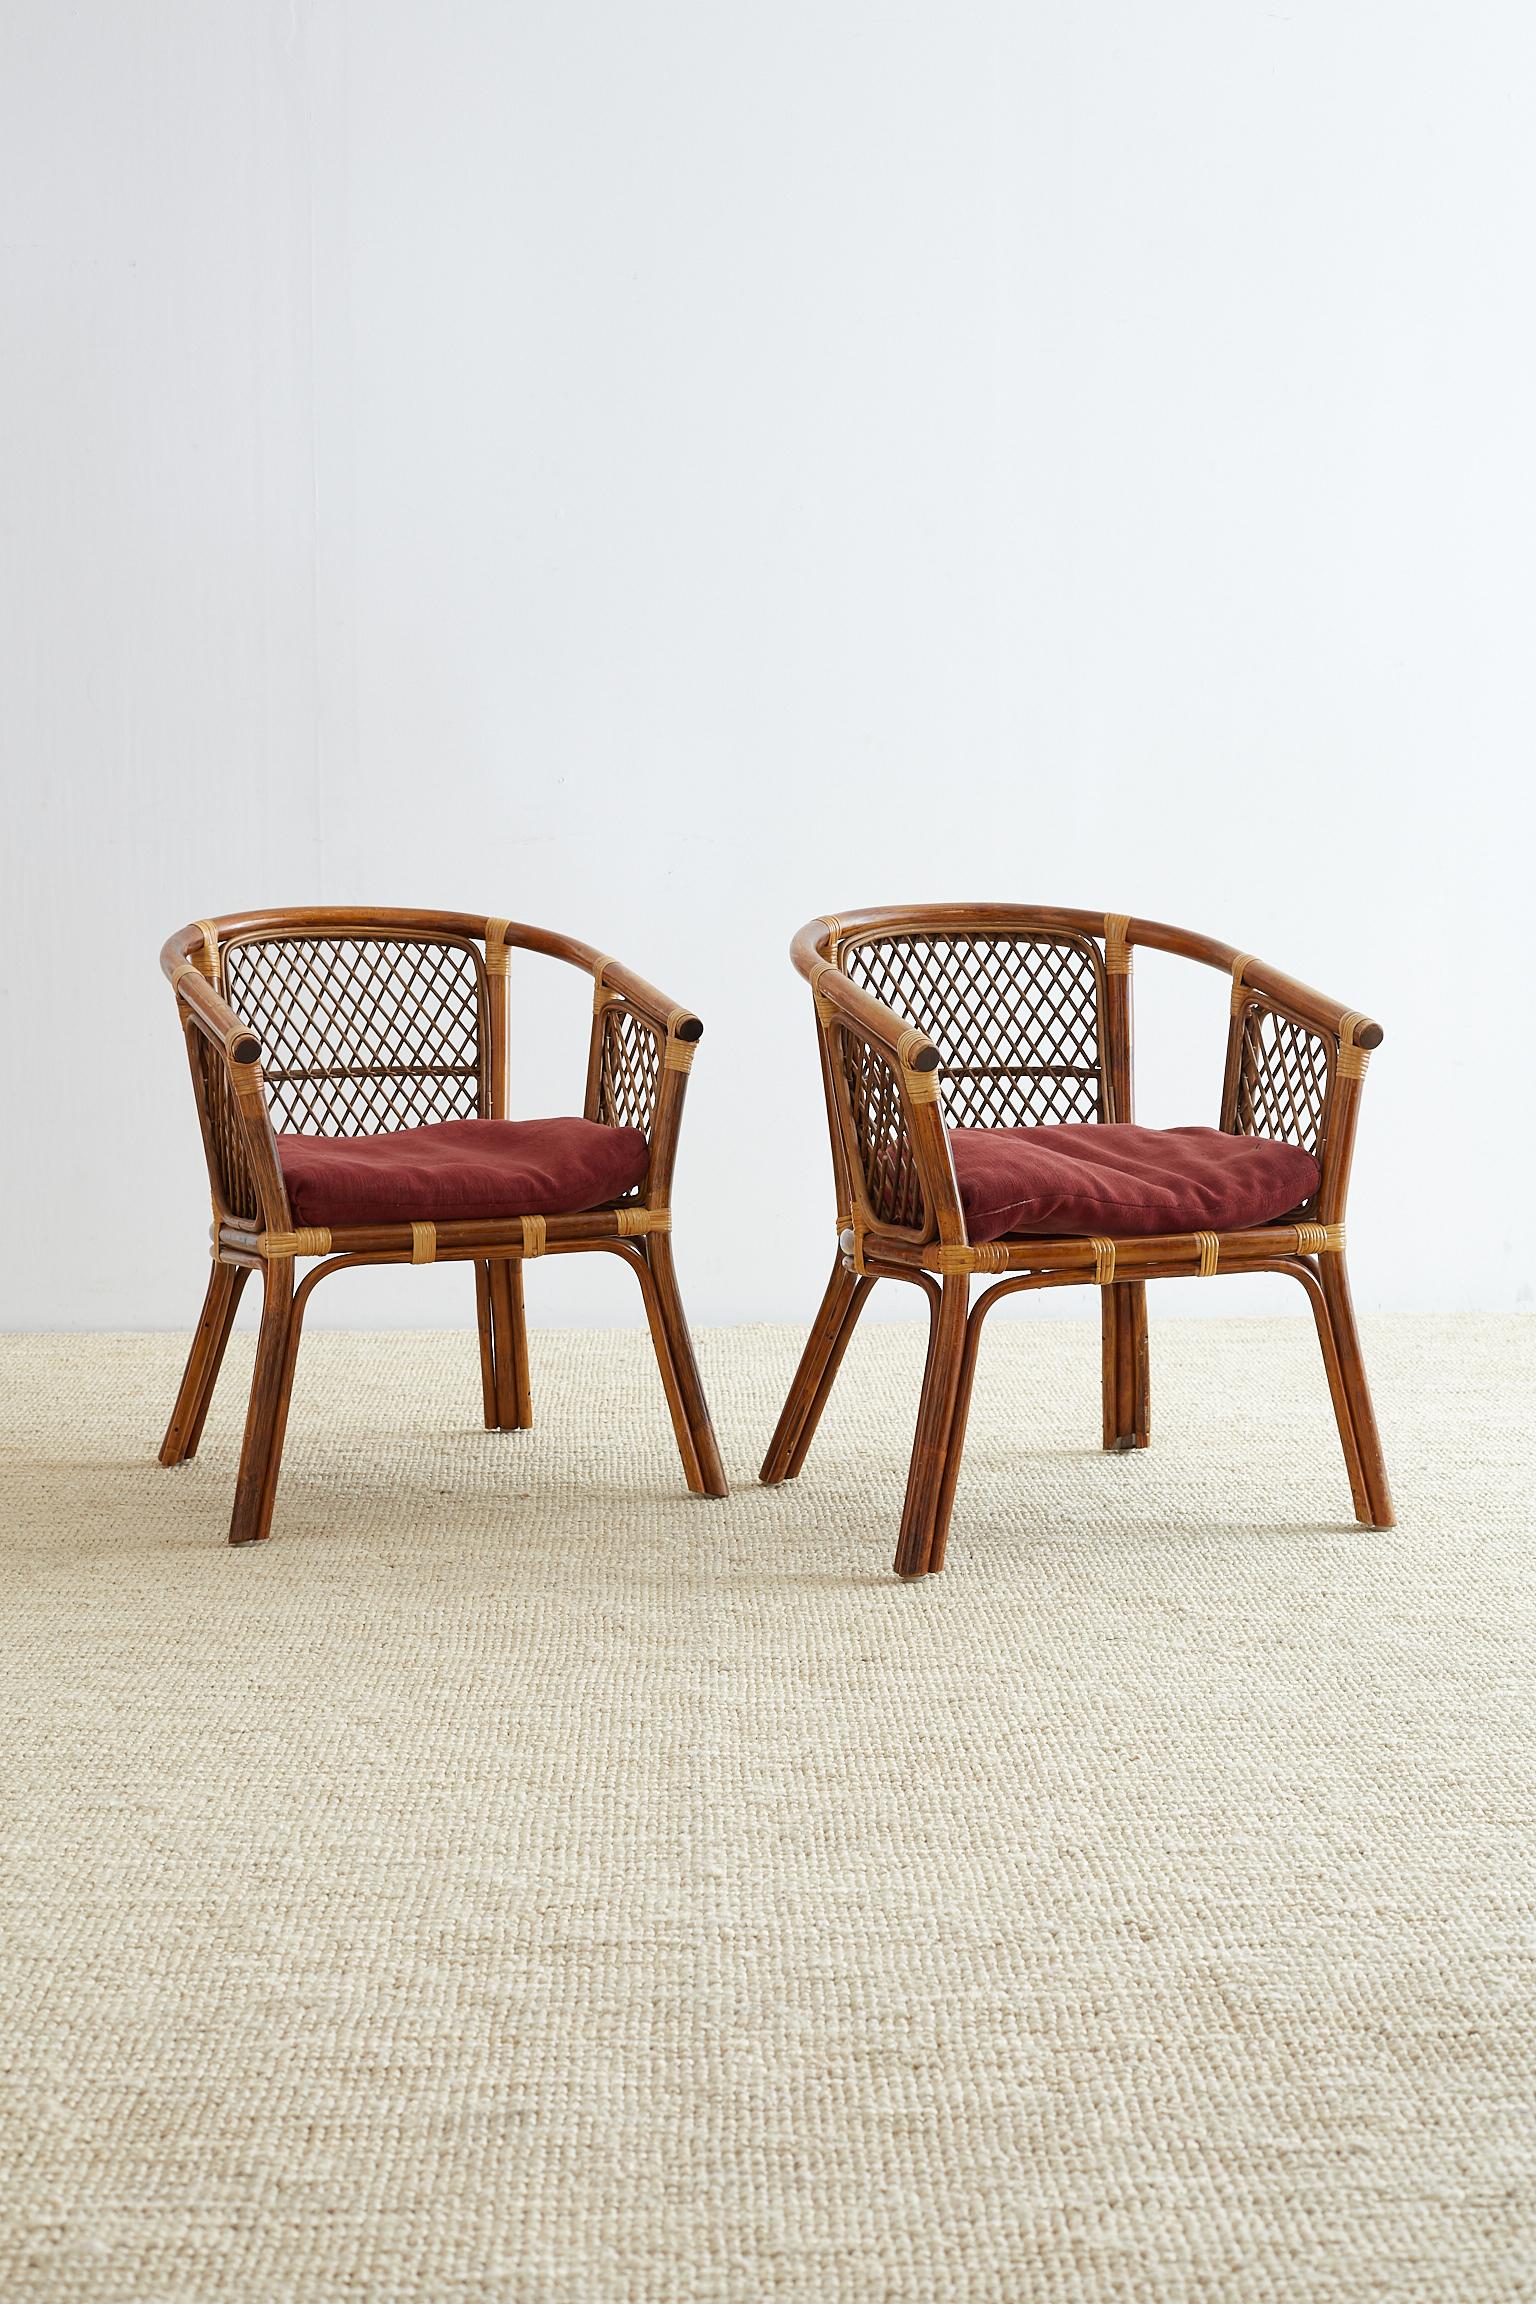 Stylish pair of Mid-Century Modern bamboo rattan club chairs featuring a barrel back design. The frames have decorative open lattice fretwork on the back and sides. The seat has an upholstered loose cushion with a vintage fabric. Good joinery